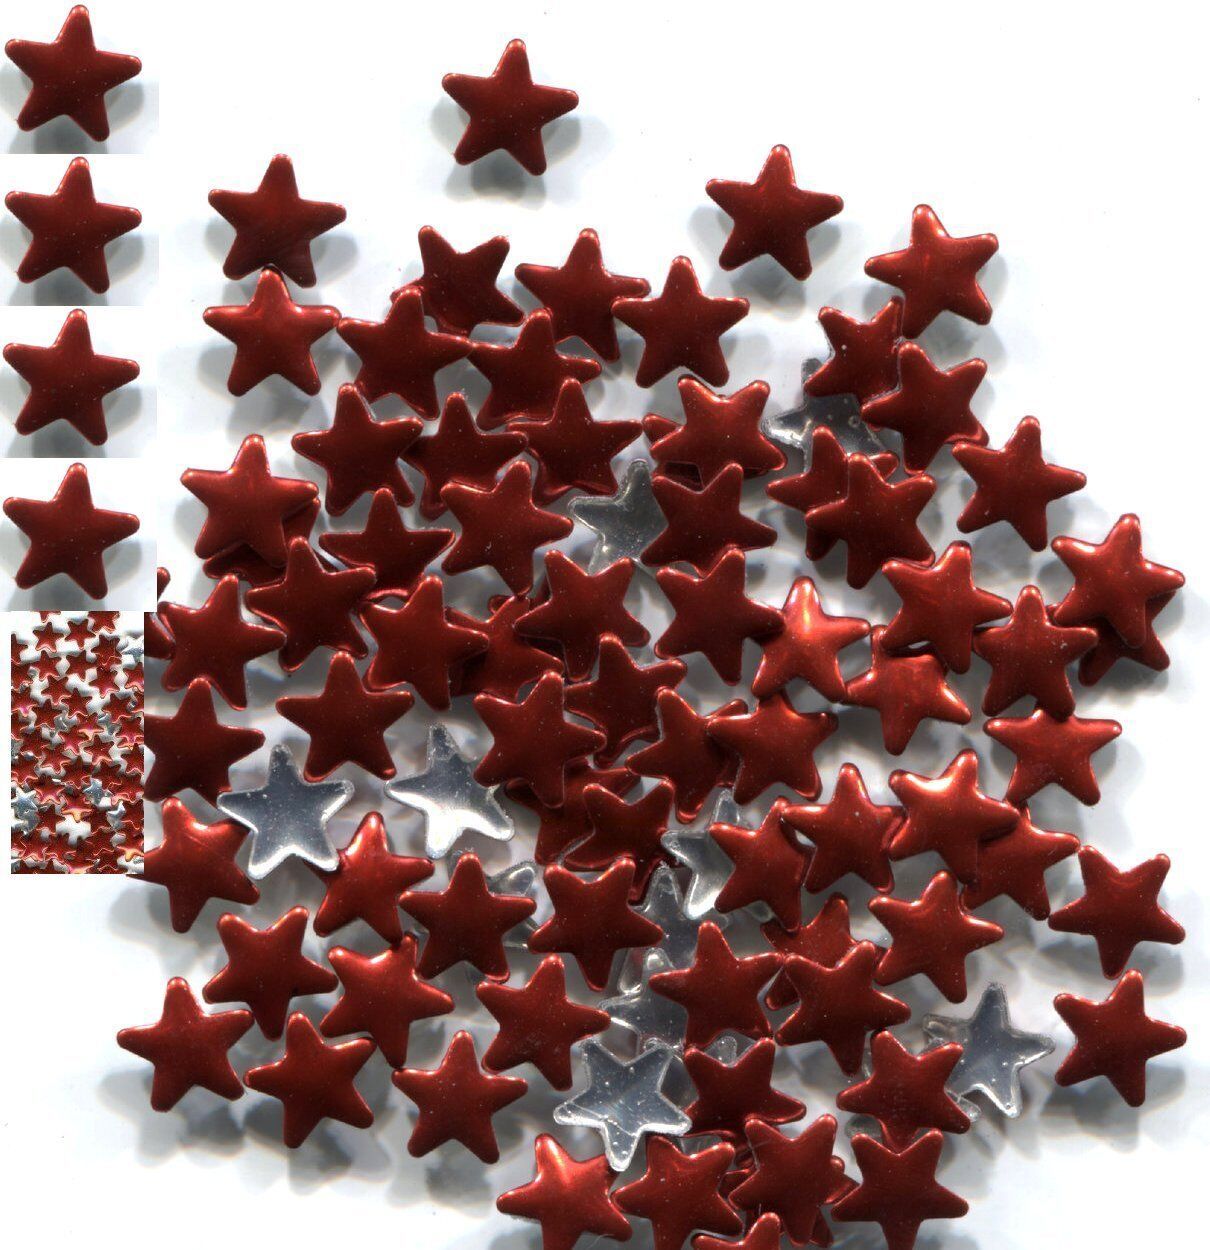 Primary image for STARS Smooth Rhinestuds 6mm   Hot Fix..  RED iron on    2 Gross  288 Pieces